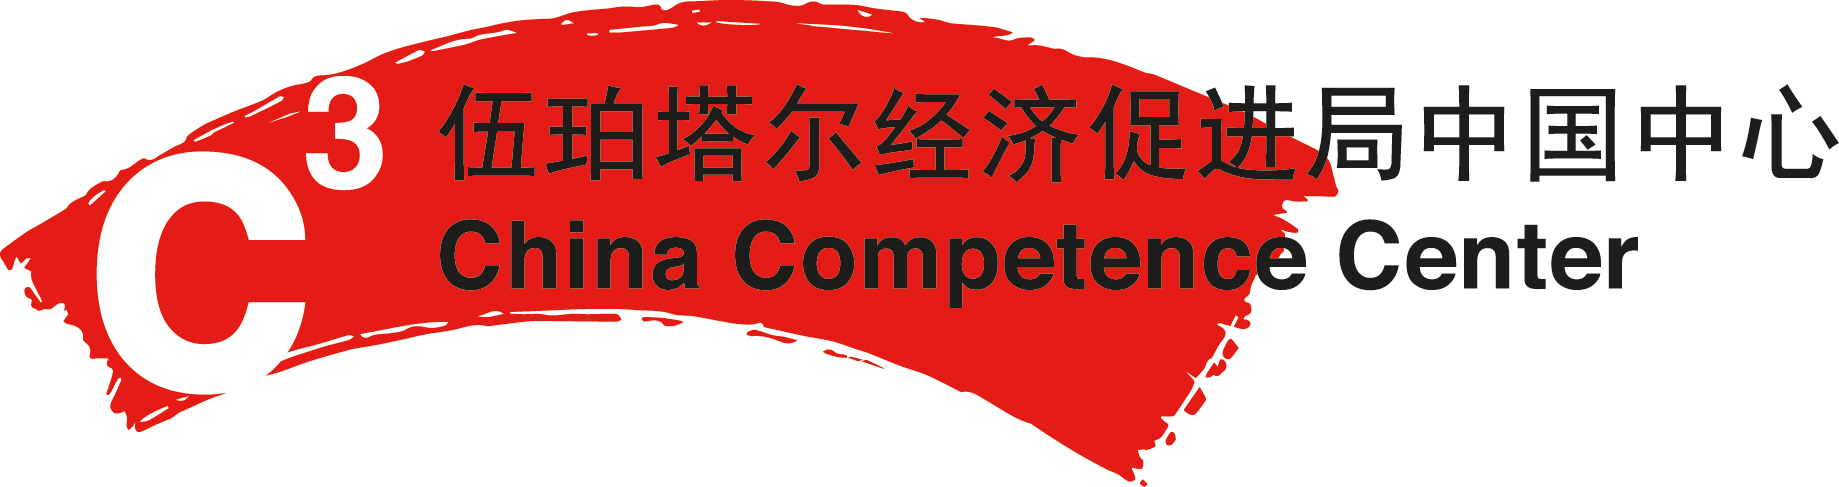 China Competence Center